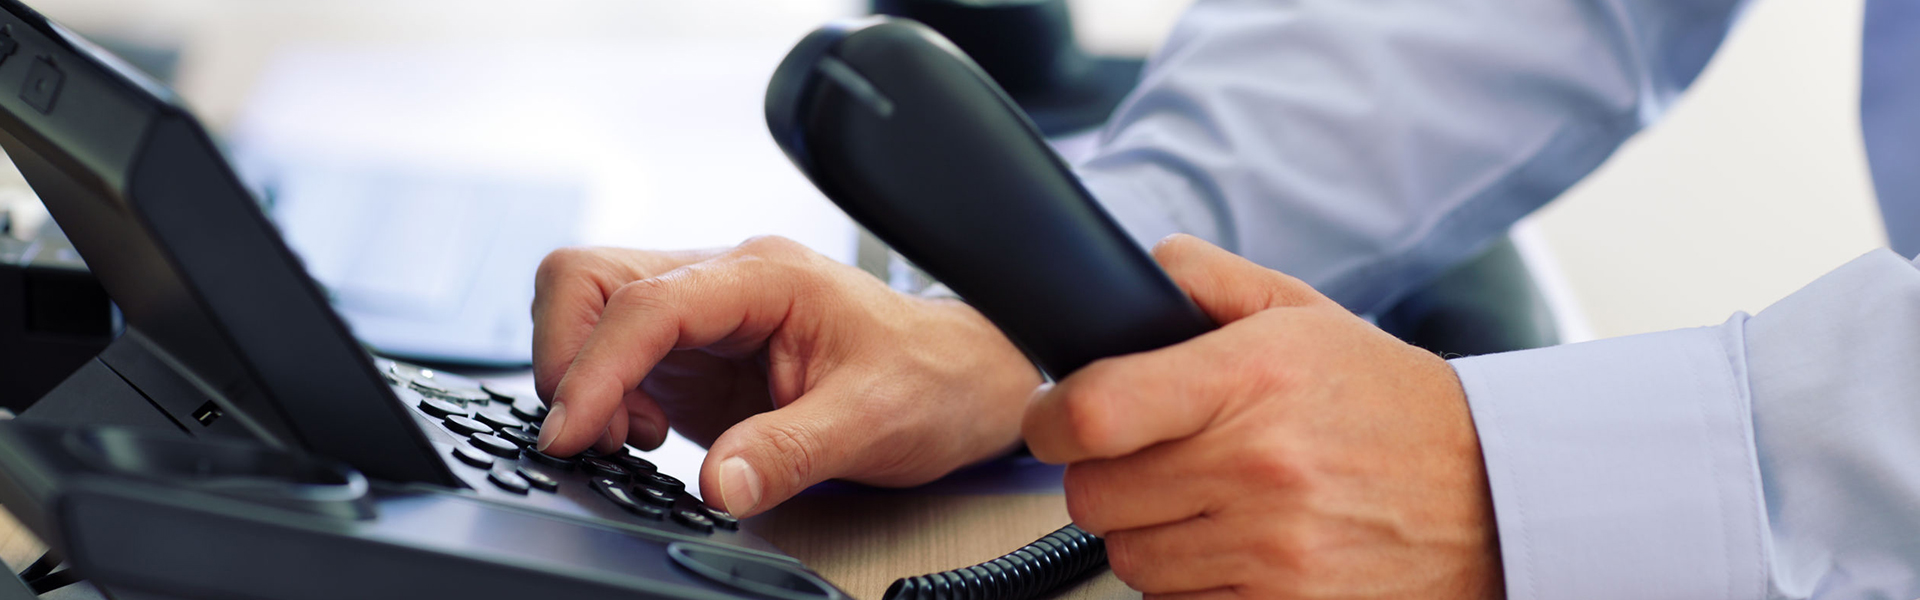 VoIP Business Phone Systems